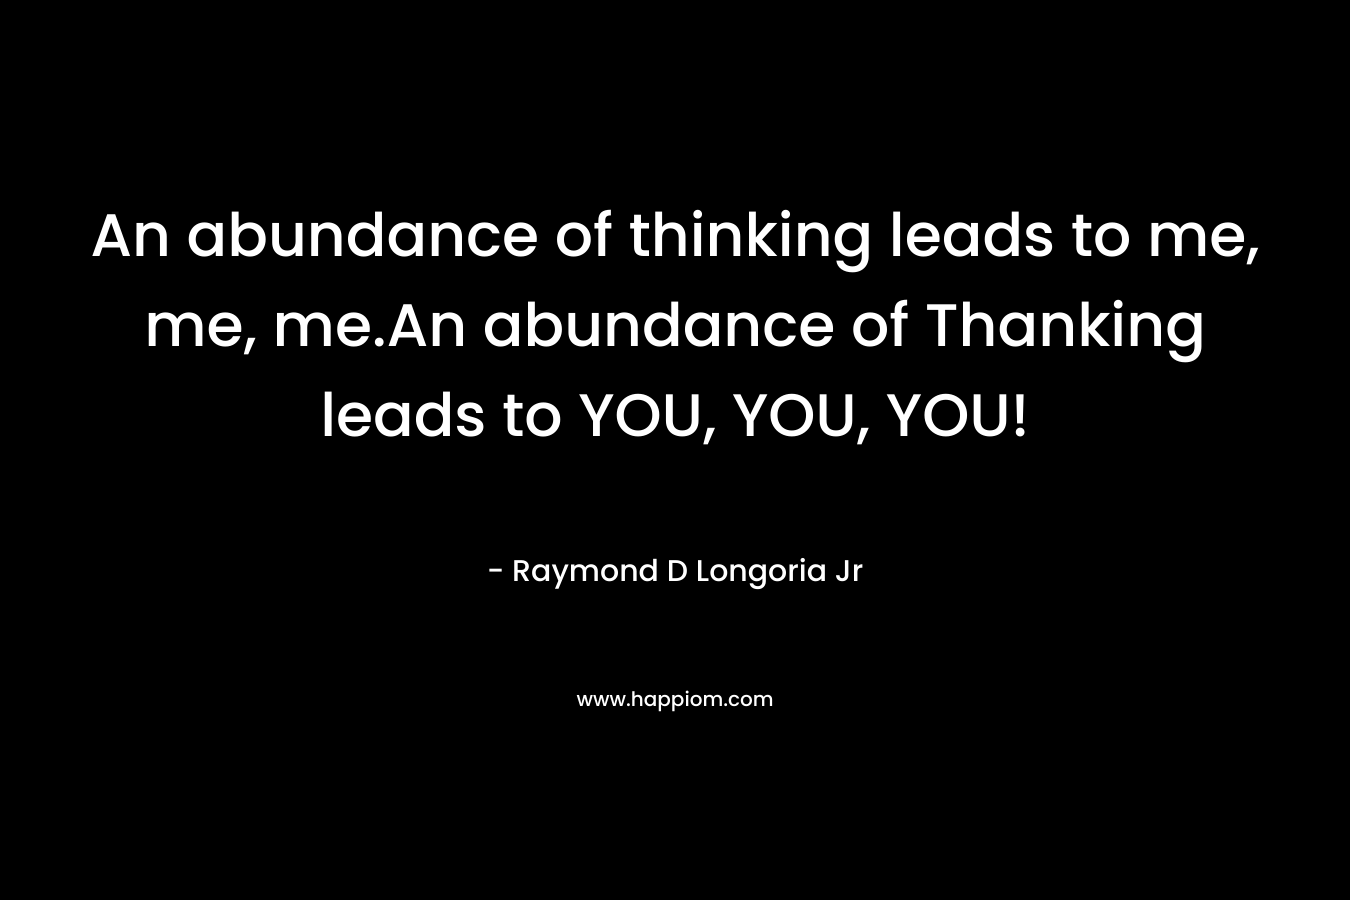 An abundance of thinking leads to me, me, me.An abundance of Thanking leads to YOU, YOU, YOU!